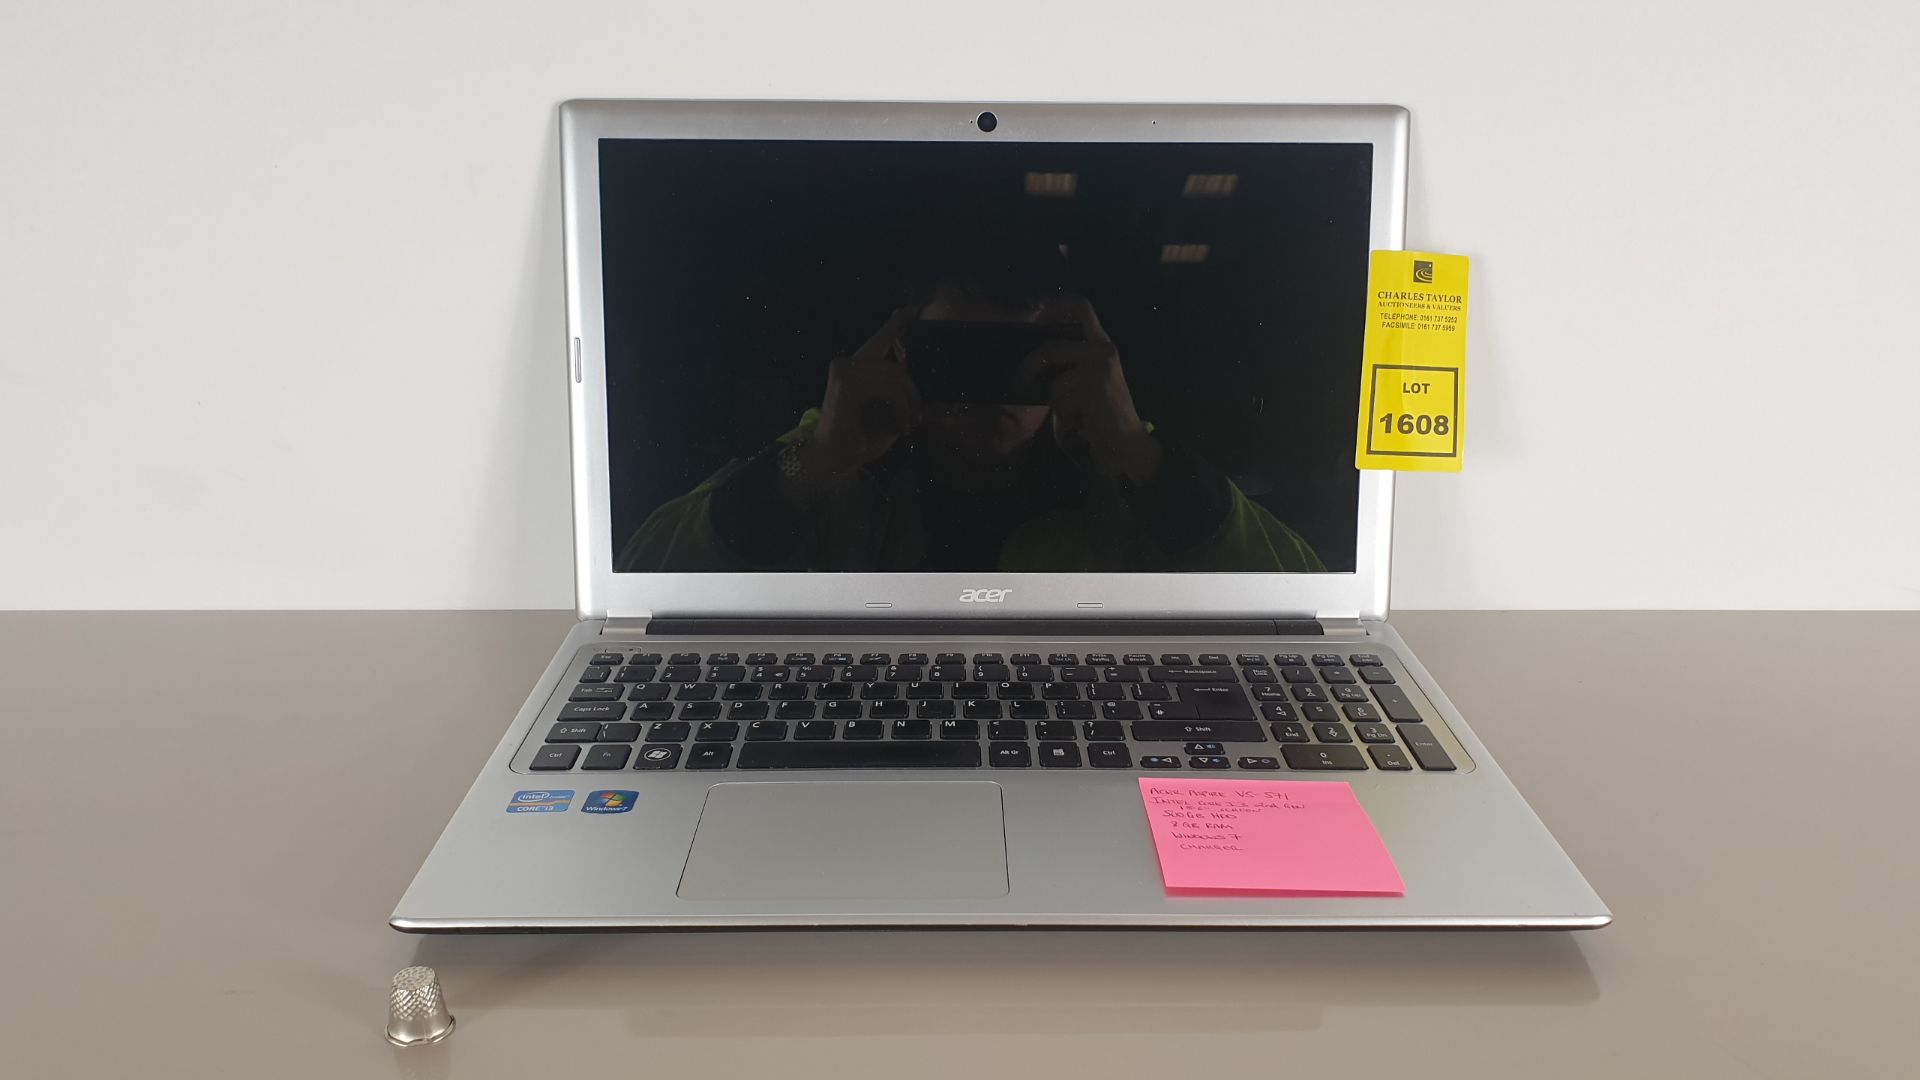 (LOT FOR THURSDAY 28TH MAY AUCTION) ACER ASPIRE V5-571 LAPTOP - INTEL CORE I3 2ND GEN 500GB HDD -